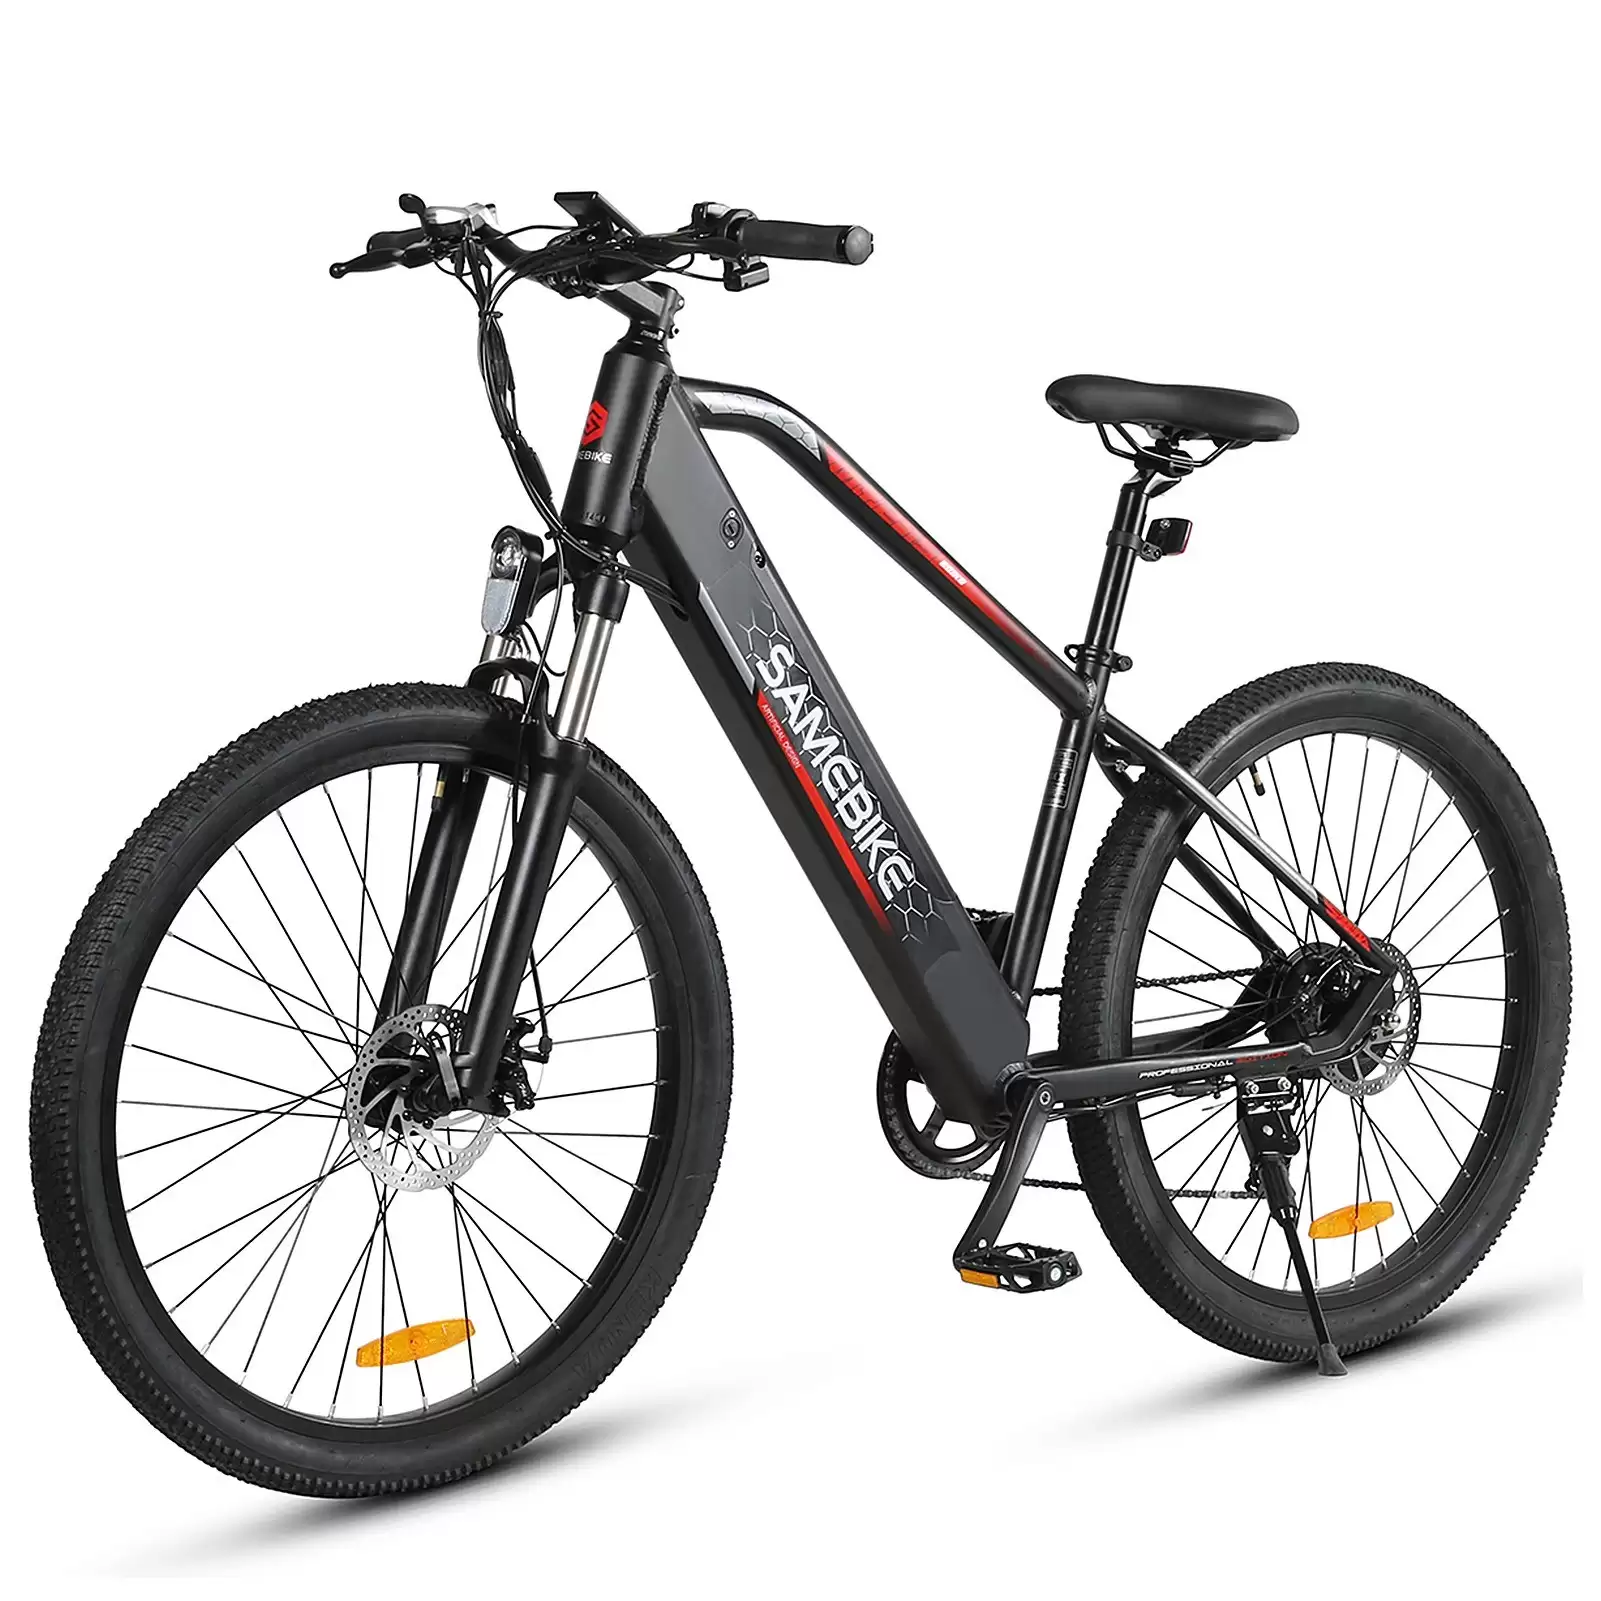 Pay Only € 839.99 For Samebike My-275 E-Bike + Free Shipping With This Discount Coupon At Cafago